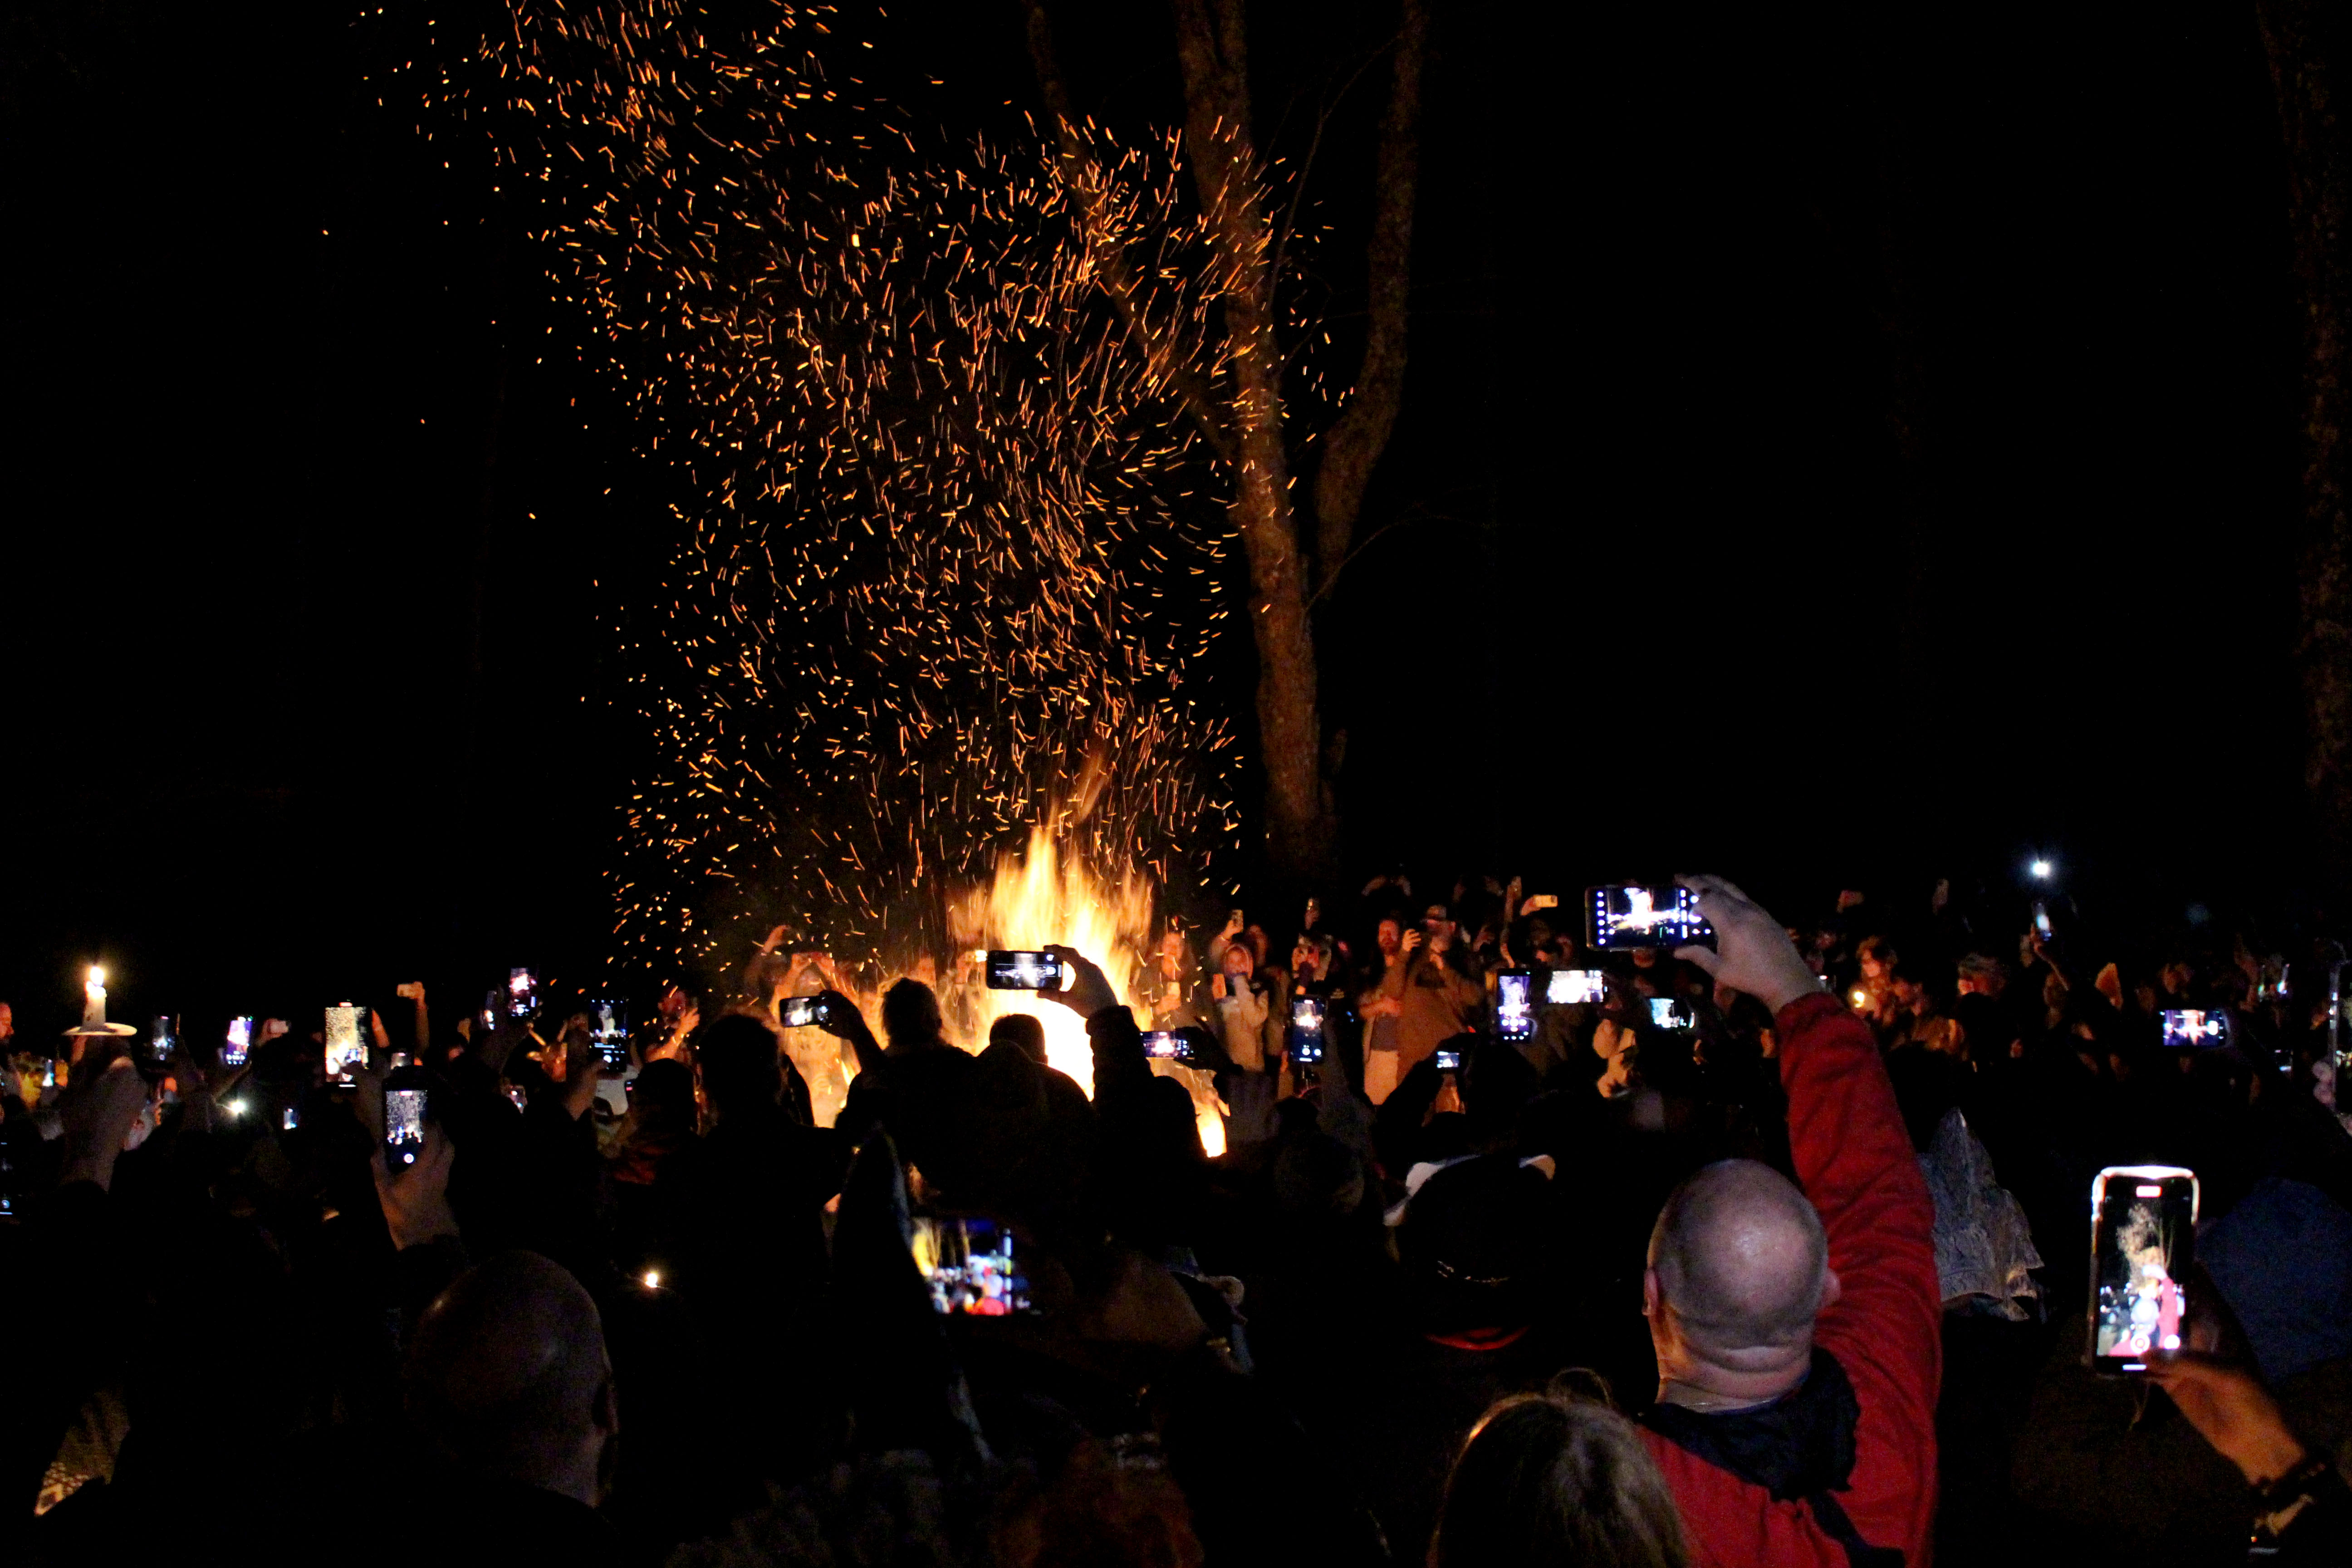 At night, a crowd surrounds a bonfire and takes photos of the flames.